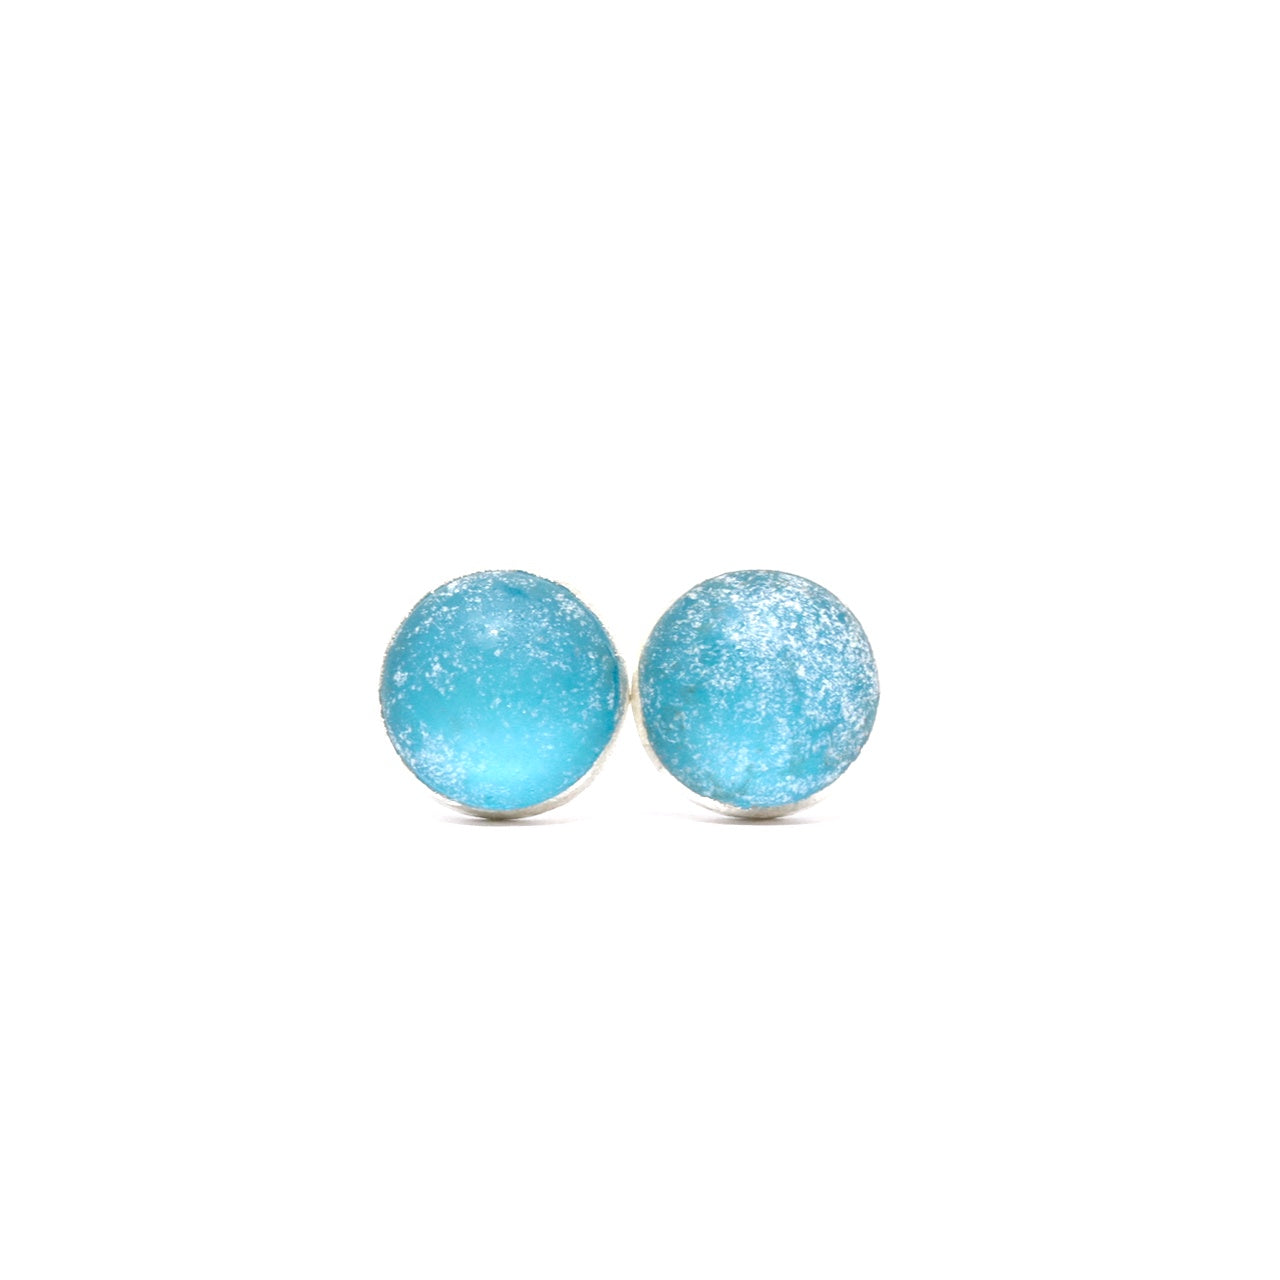 Cheerful Studs. Sterling Silver. Peacock Blue